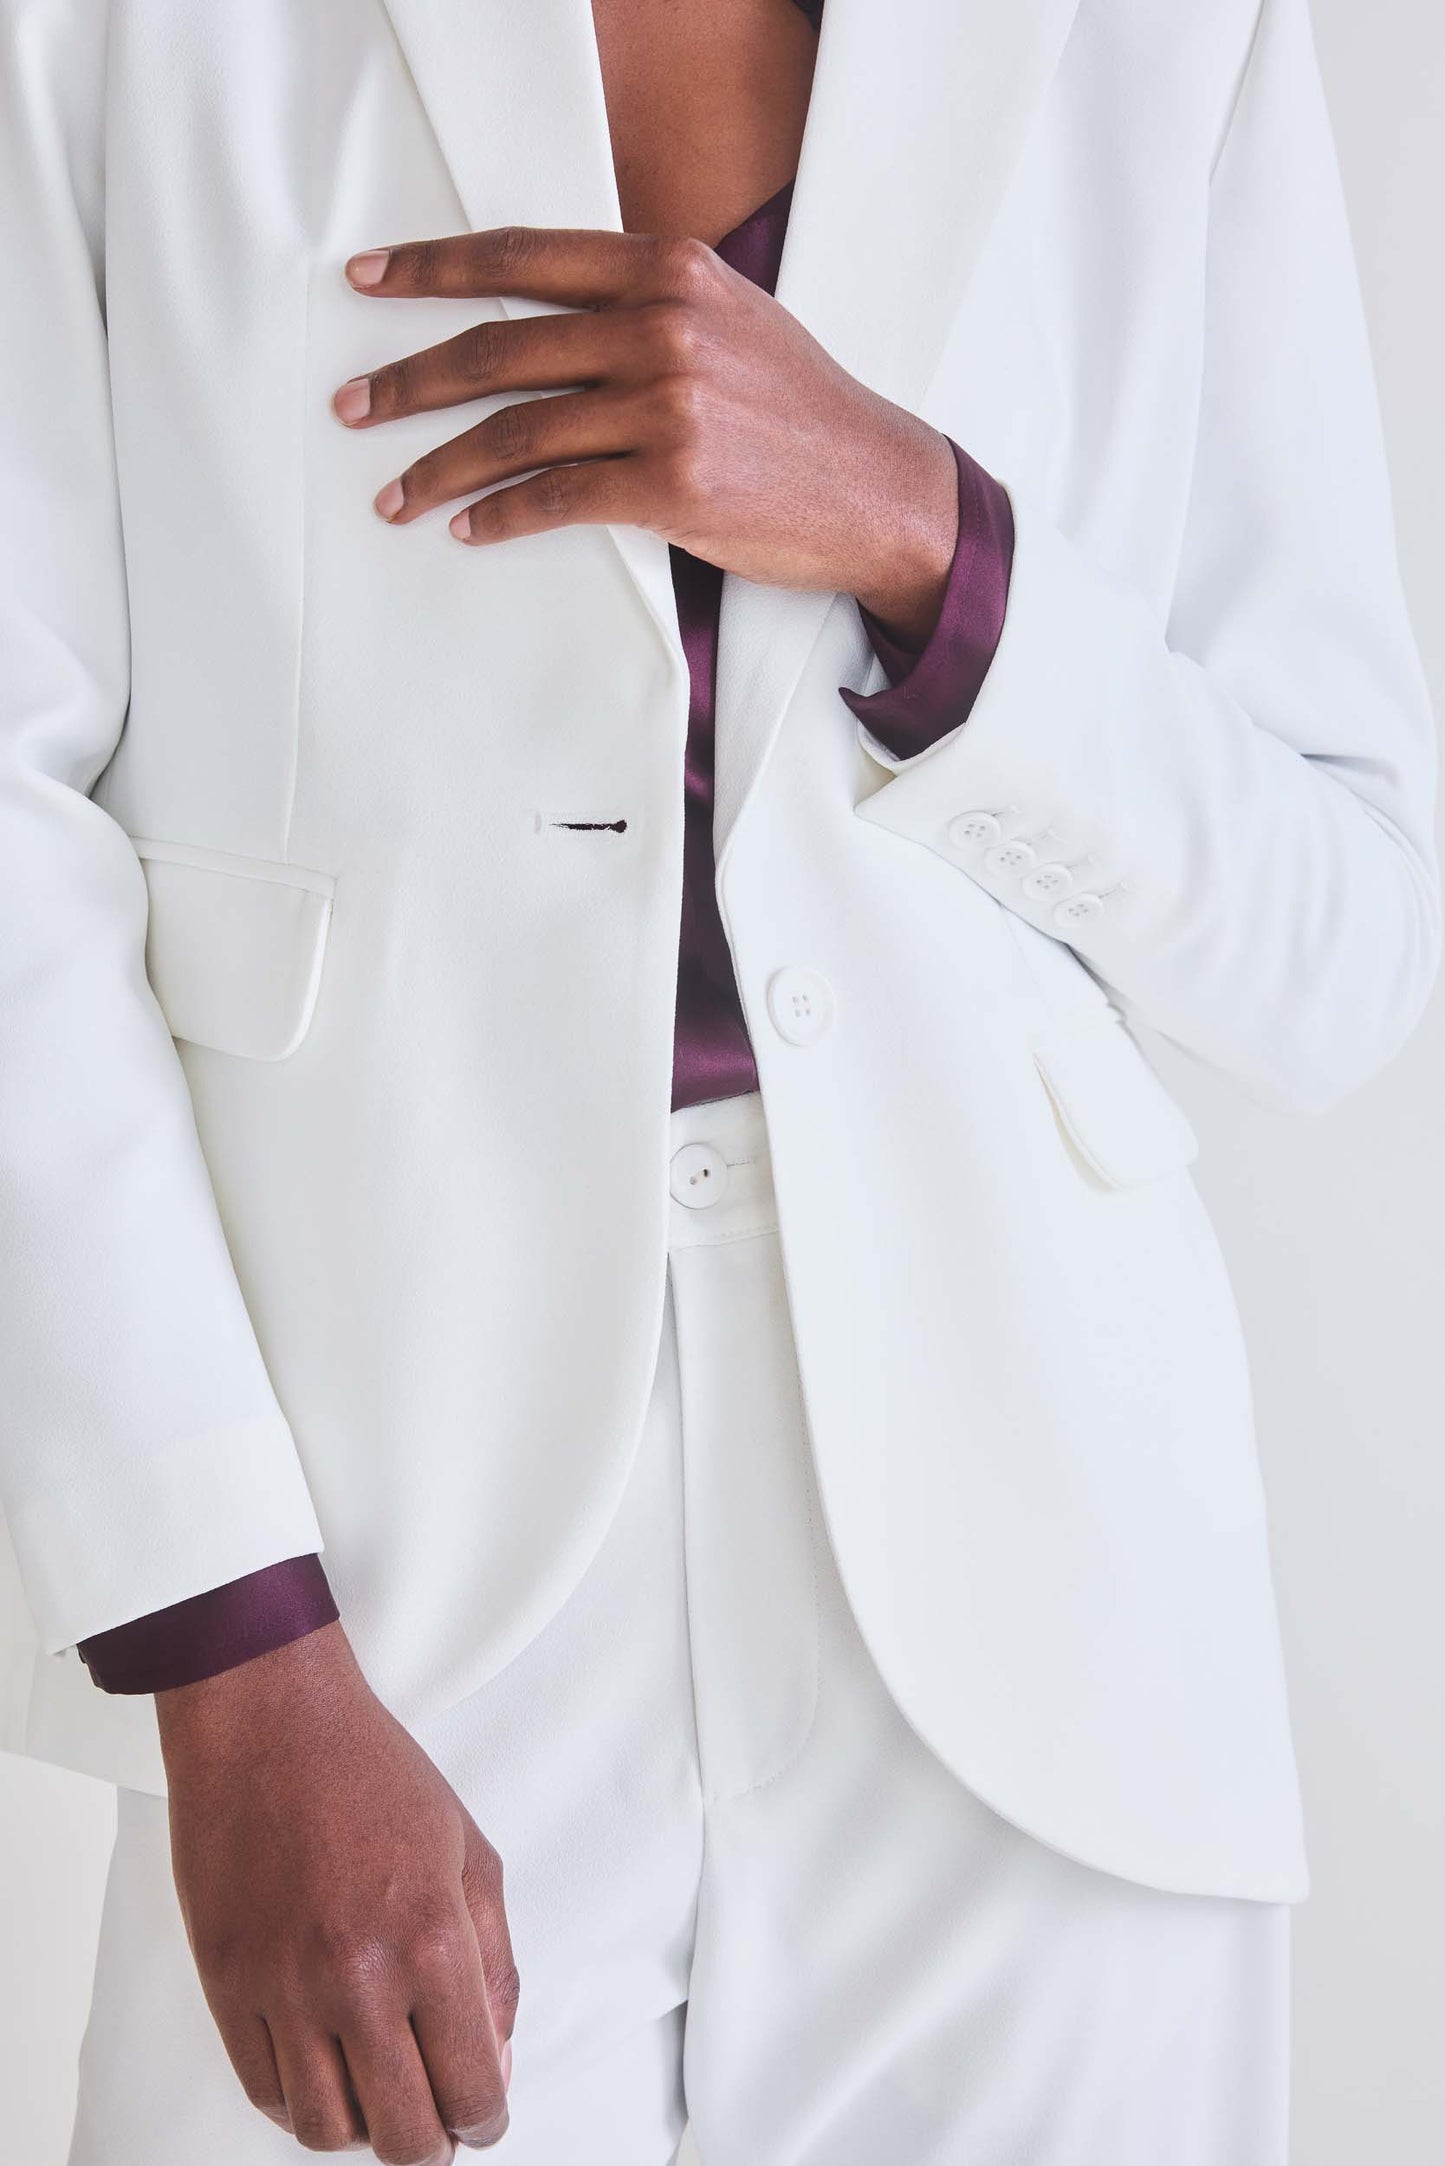 The Classic Blazer That Upgrades You